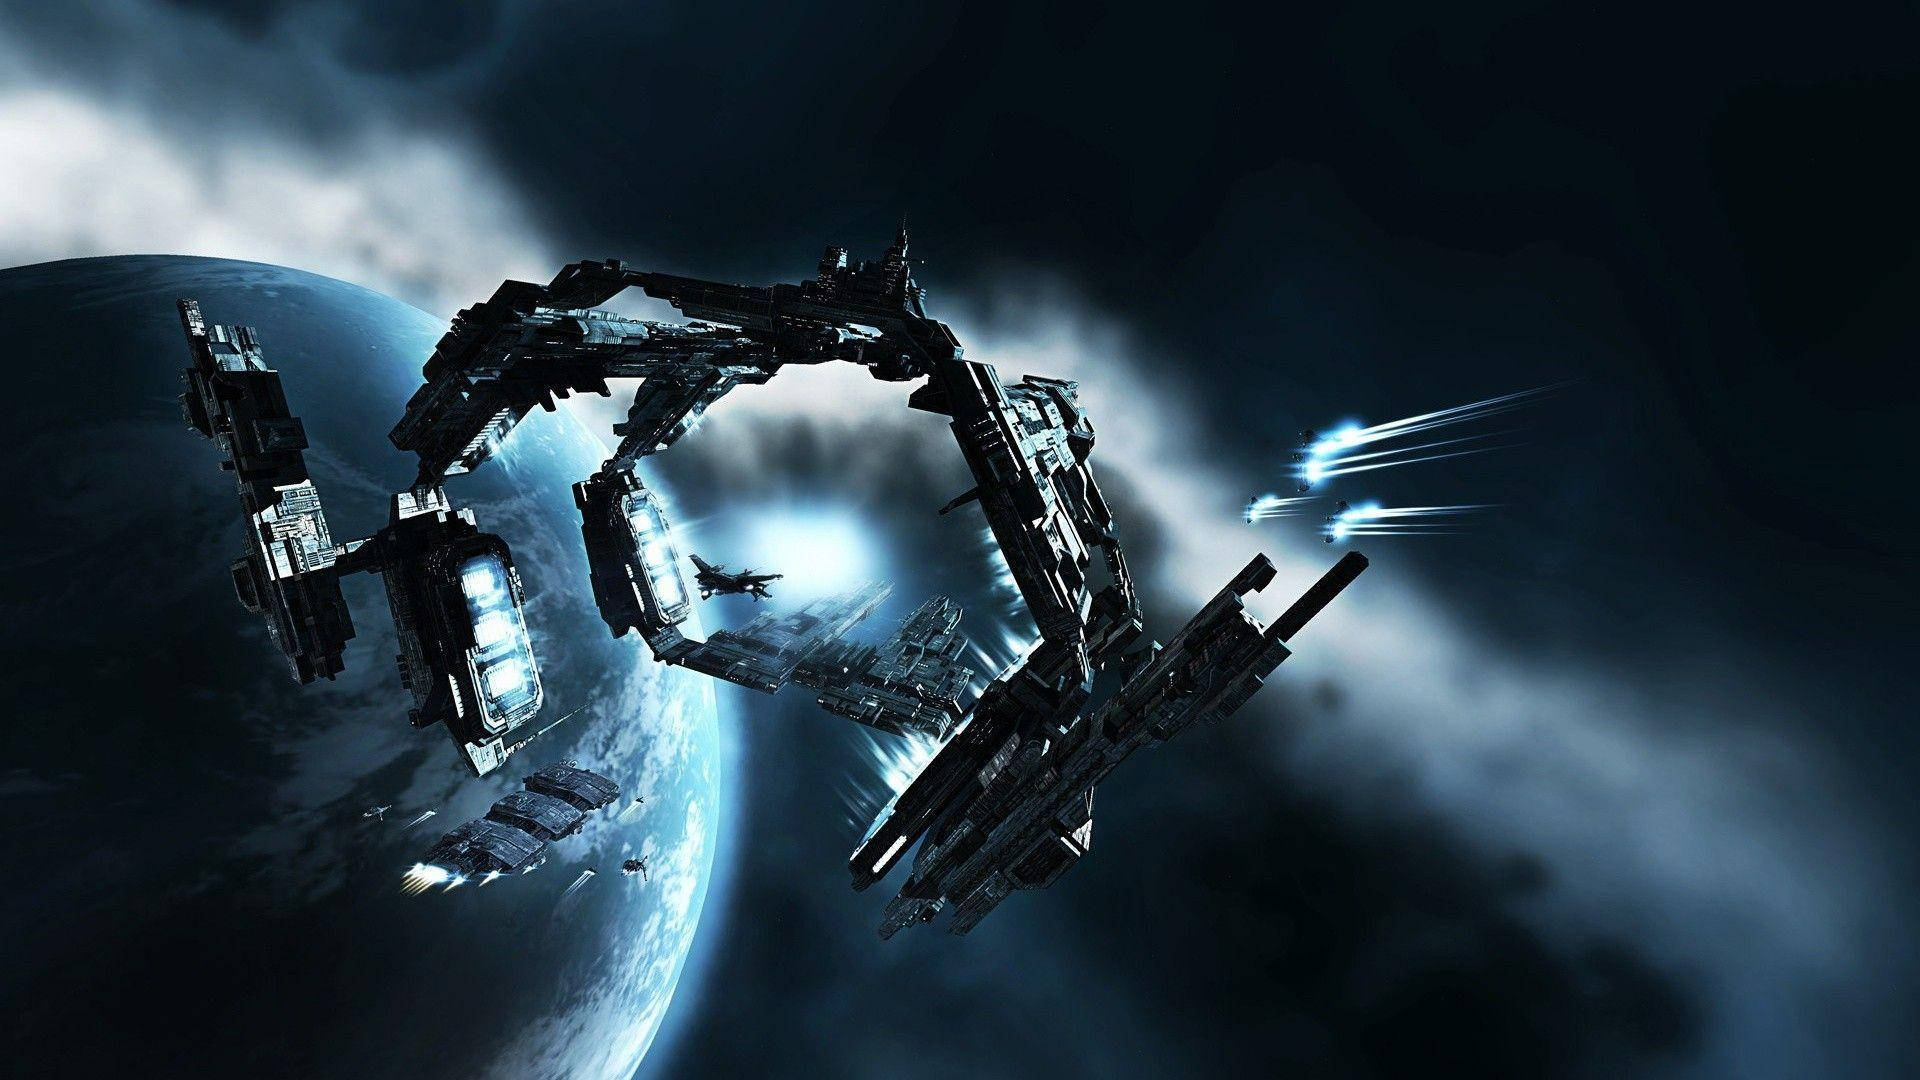 Stargate Technology Of The Eve Online Universe Wallpaper